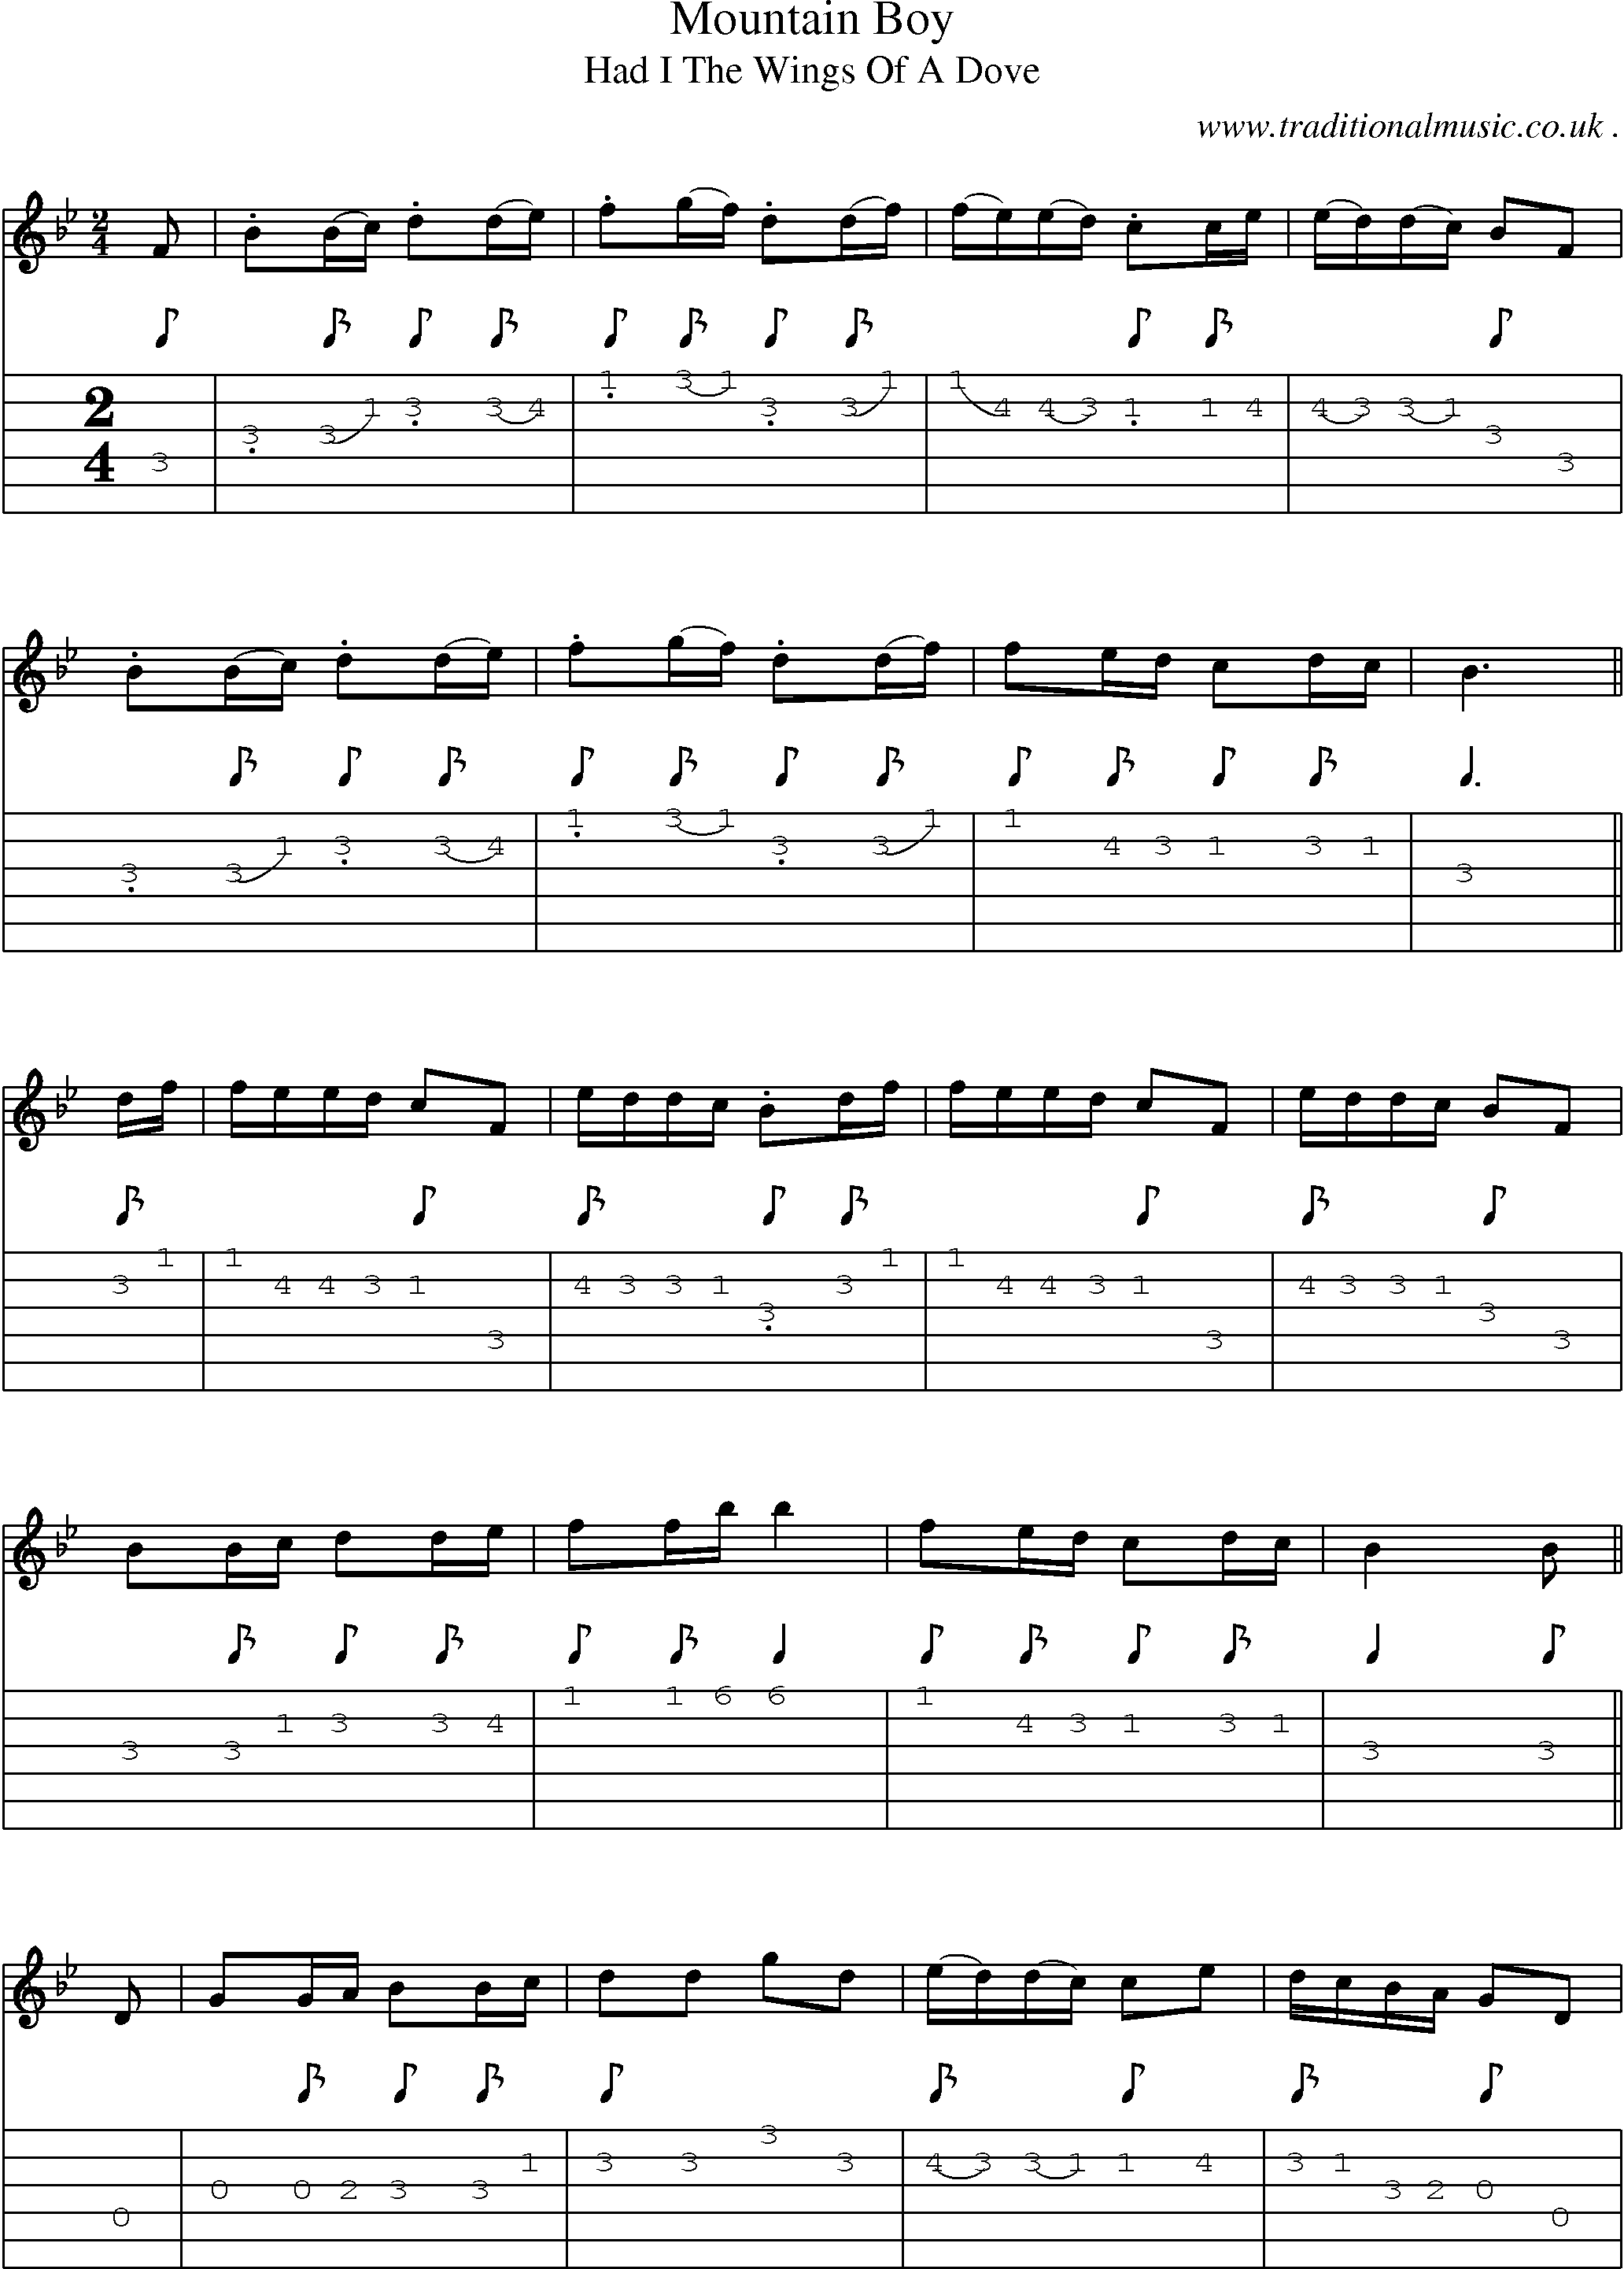 Sheet-Music and Guitar Tabs for Mountain Boy